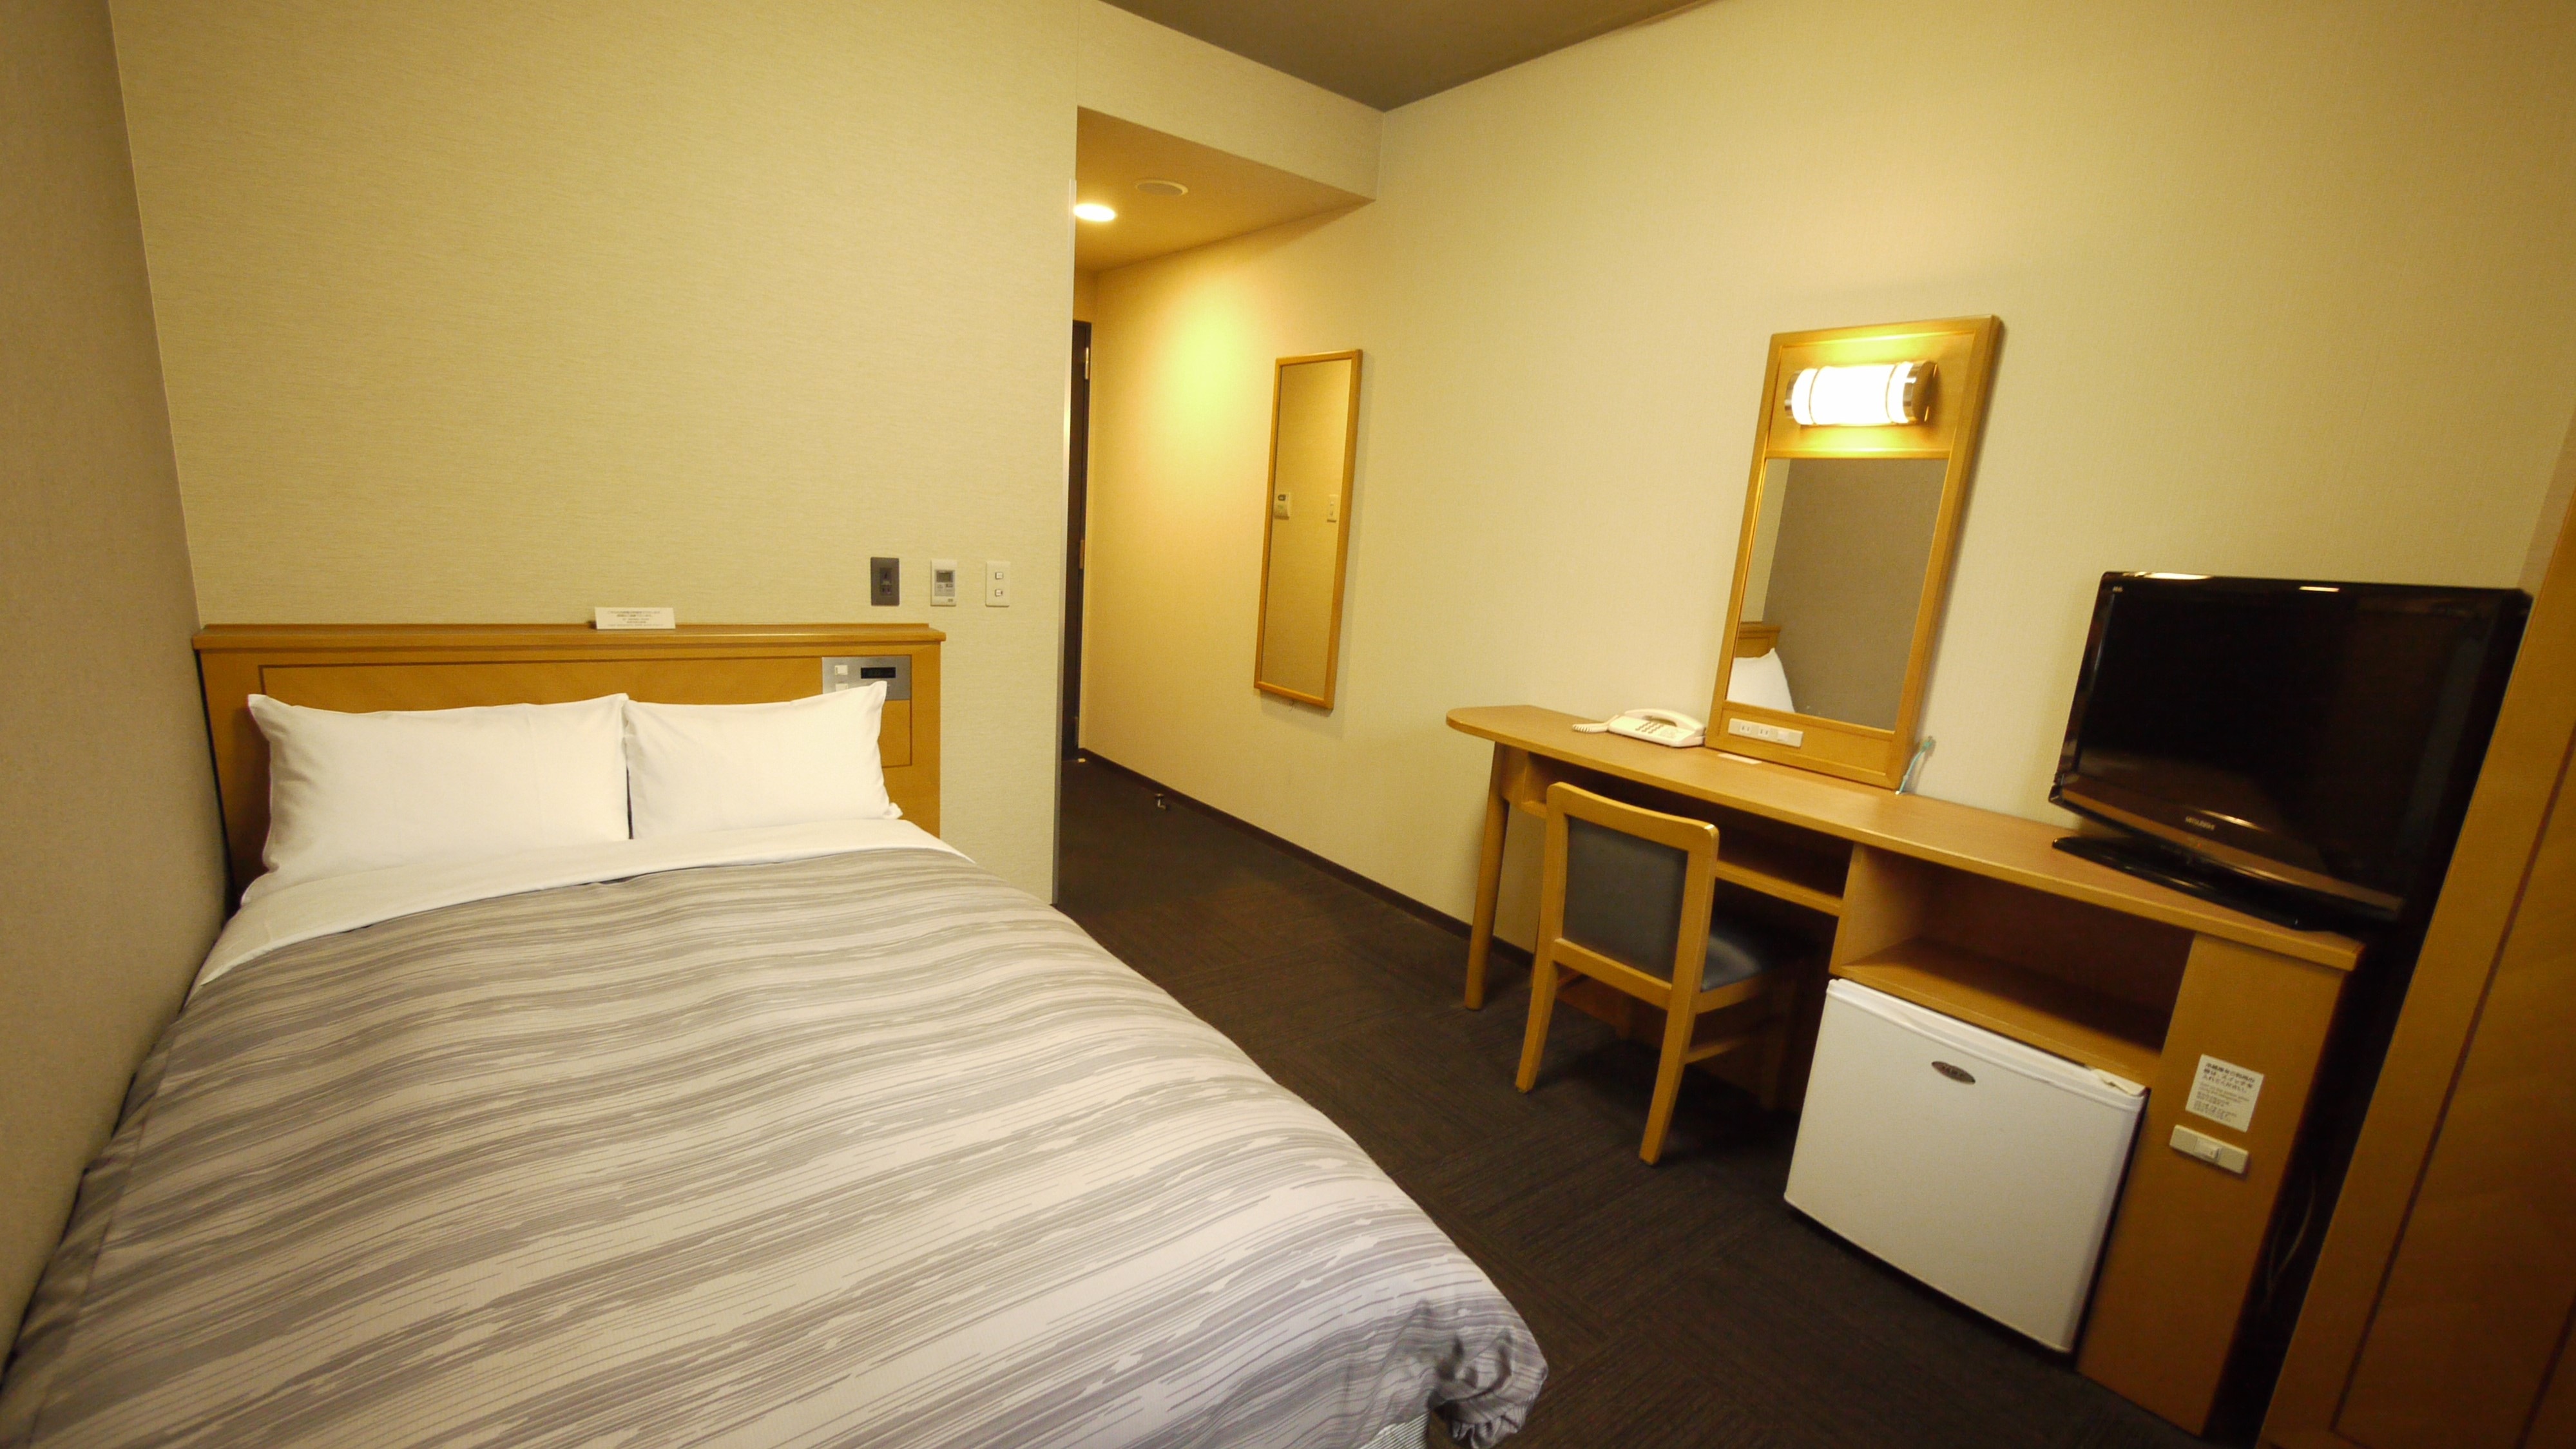 Semi-double room (approx. 12㎡) convenient for couples